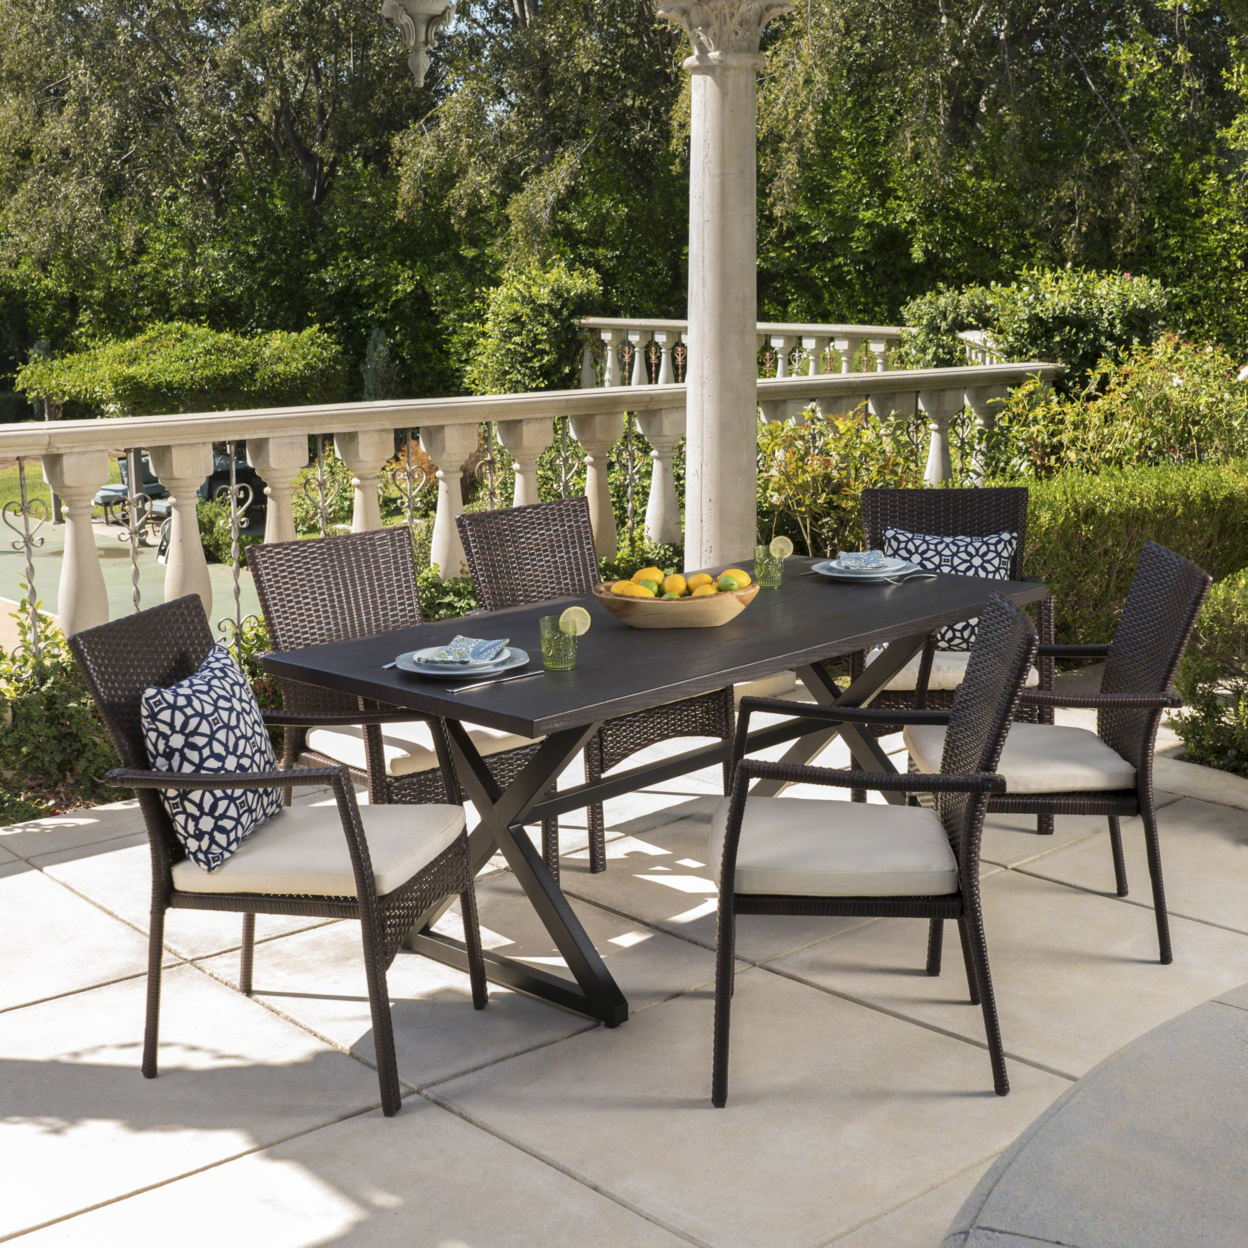 Adelade Outdoor 7 Piece Aluminum Dining Set With Wicker Dining Chairs - Dark Gray/Grey